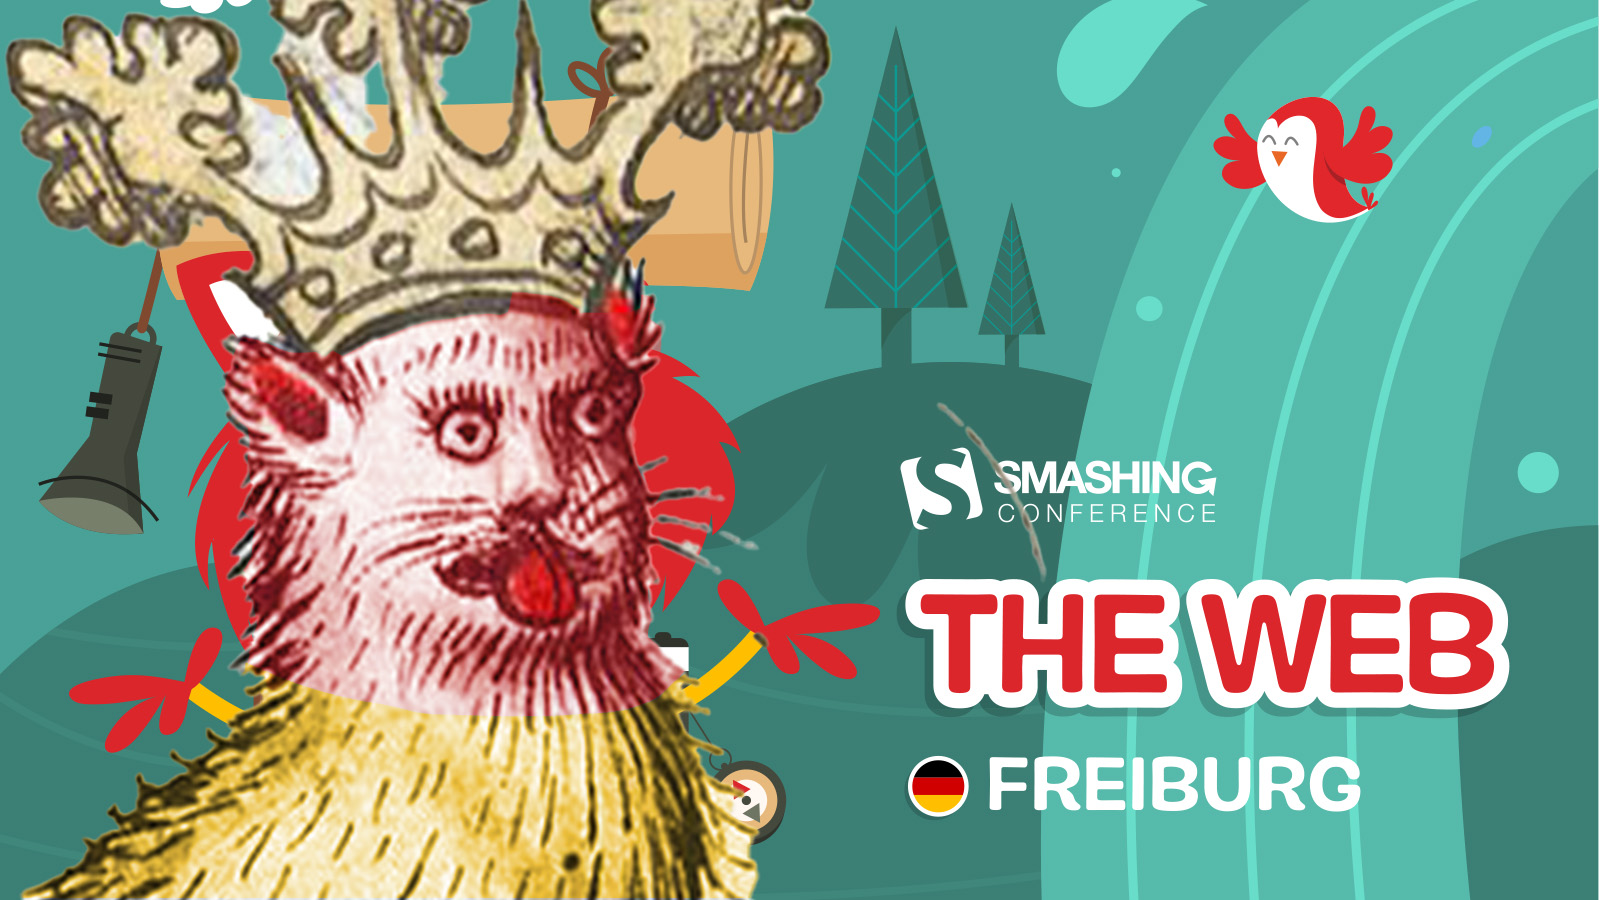 Smashing Conf banner for Freiburg, The Web - with Topple cat replaced by badly photoshopped medieval cat drawing.
